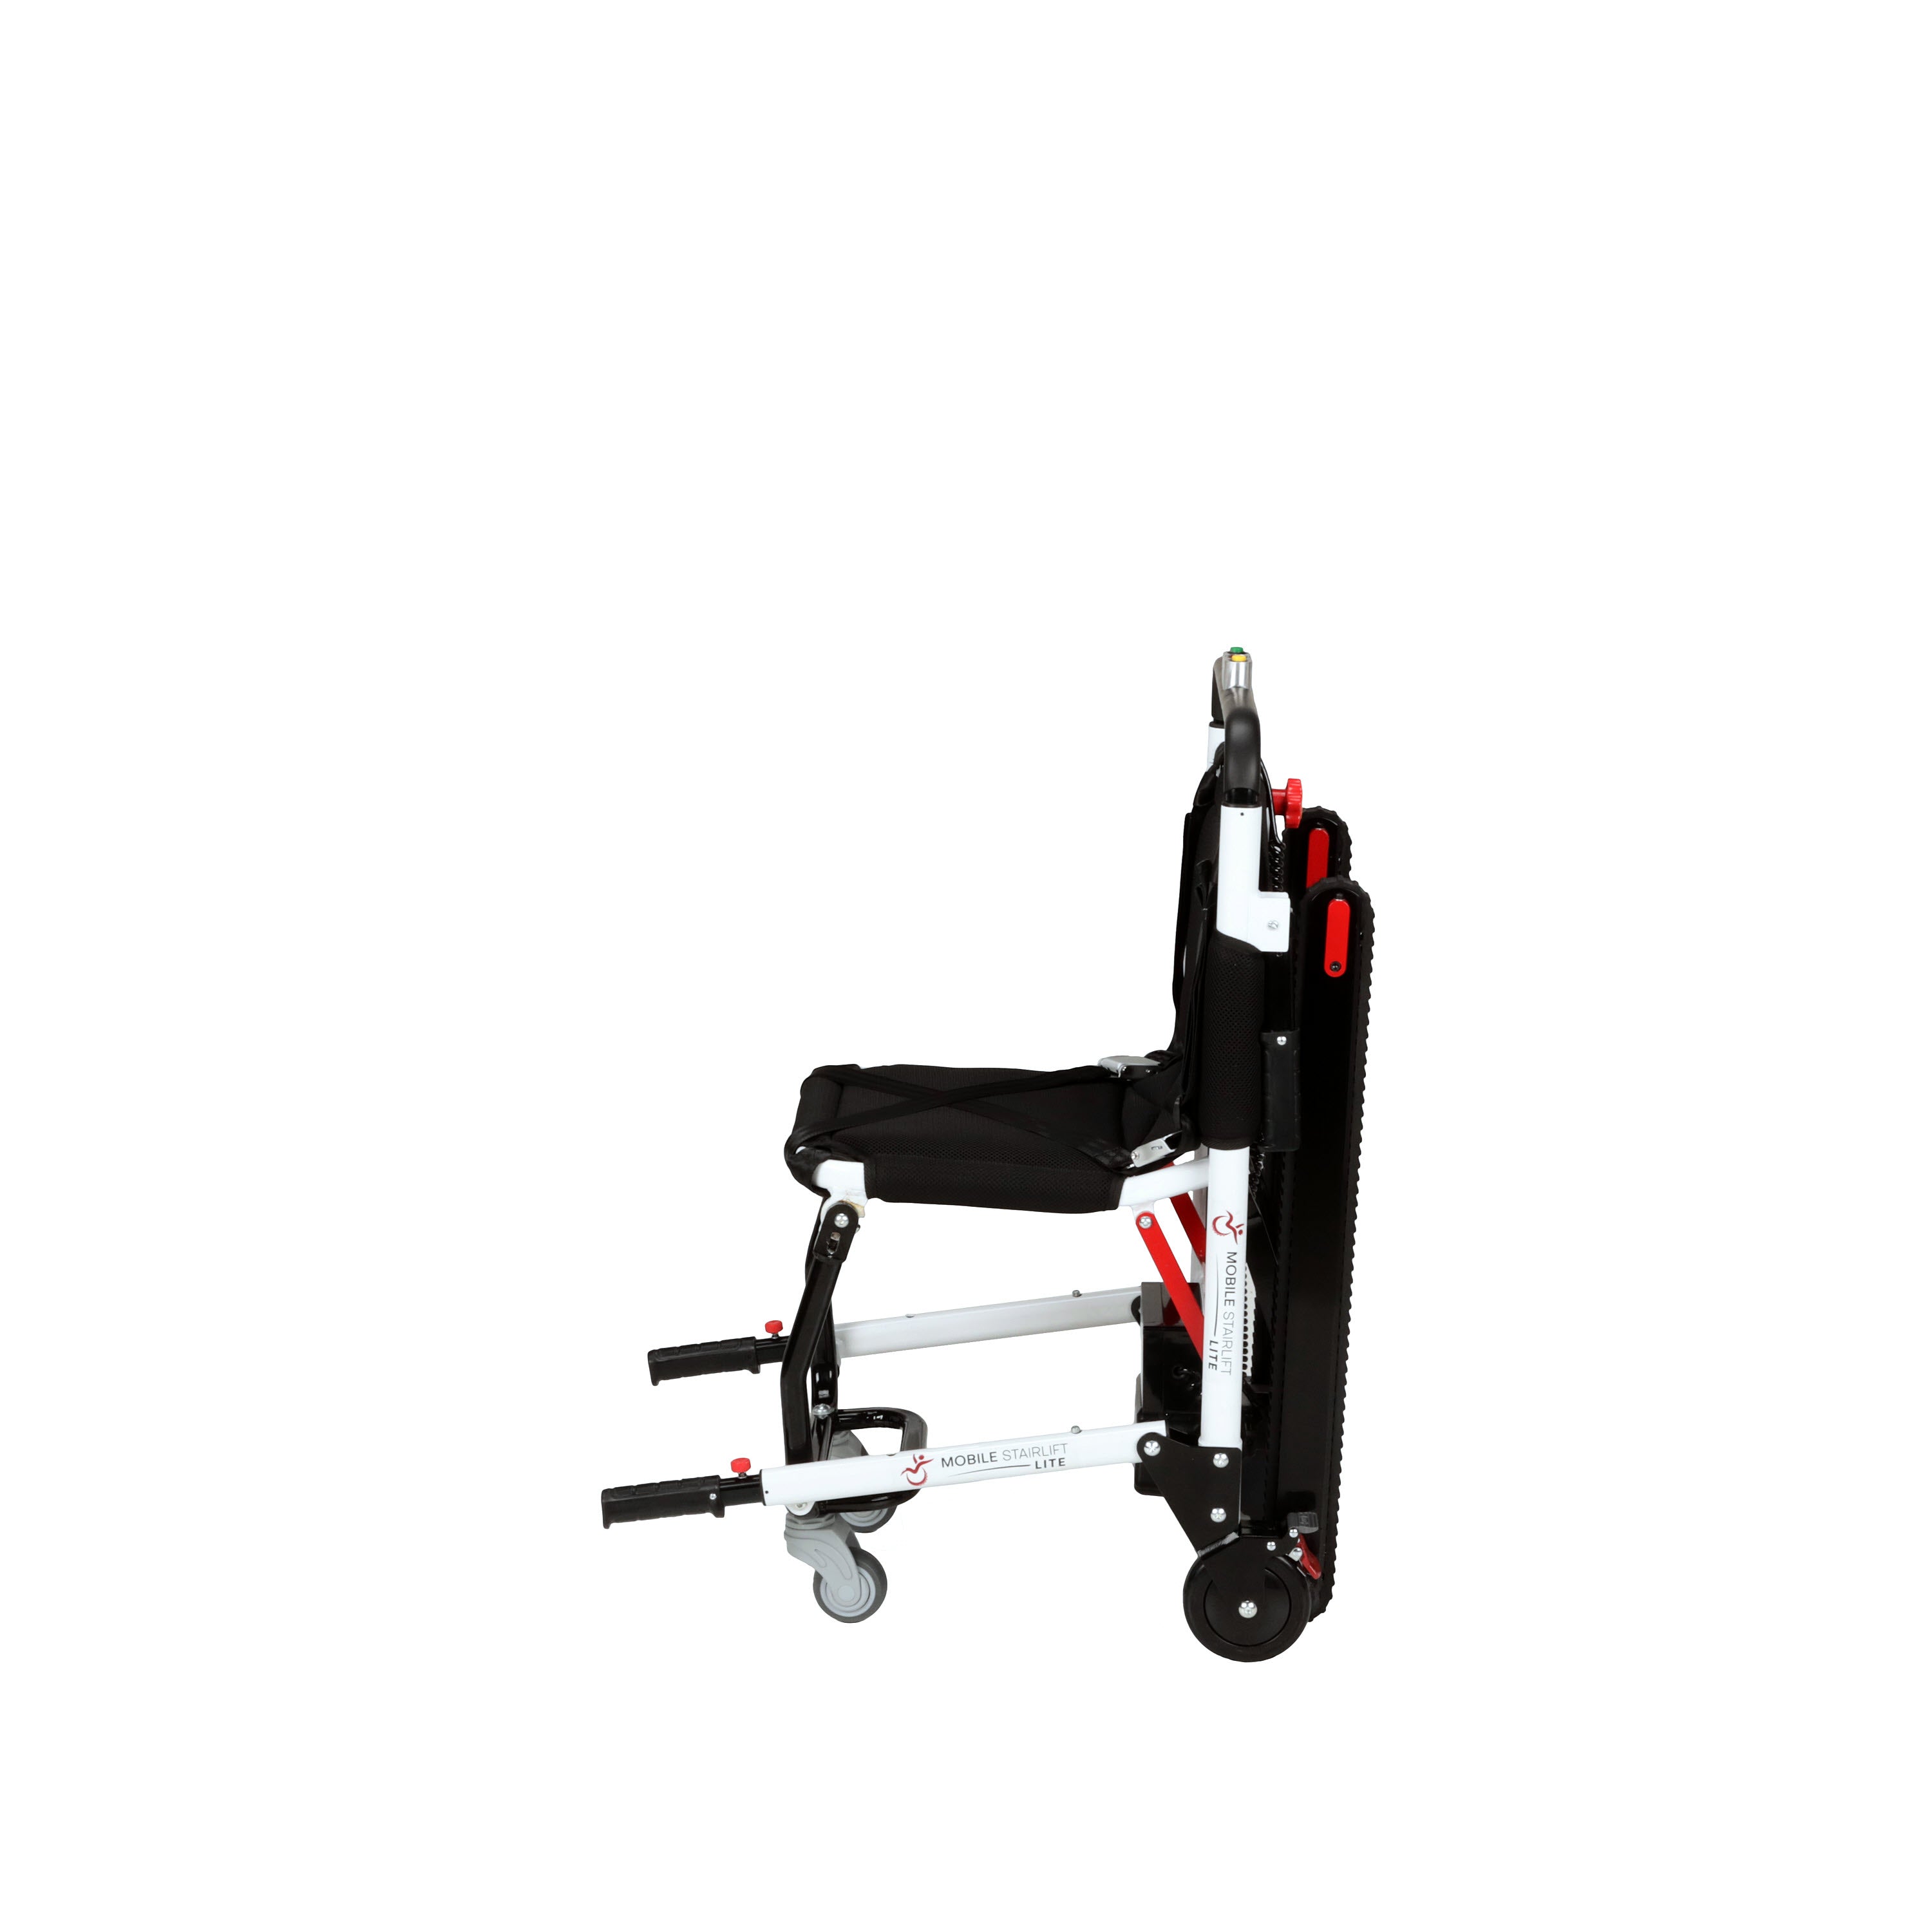 Mobile Stairlift Lite Portable Stair Wheelchair